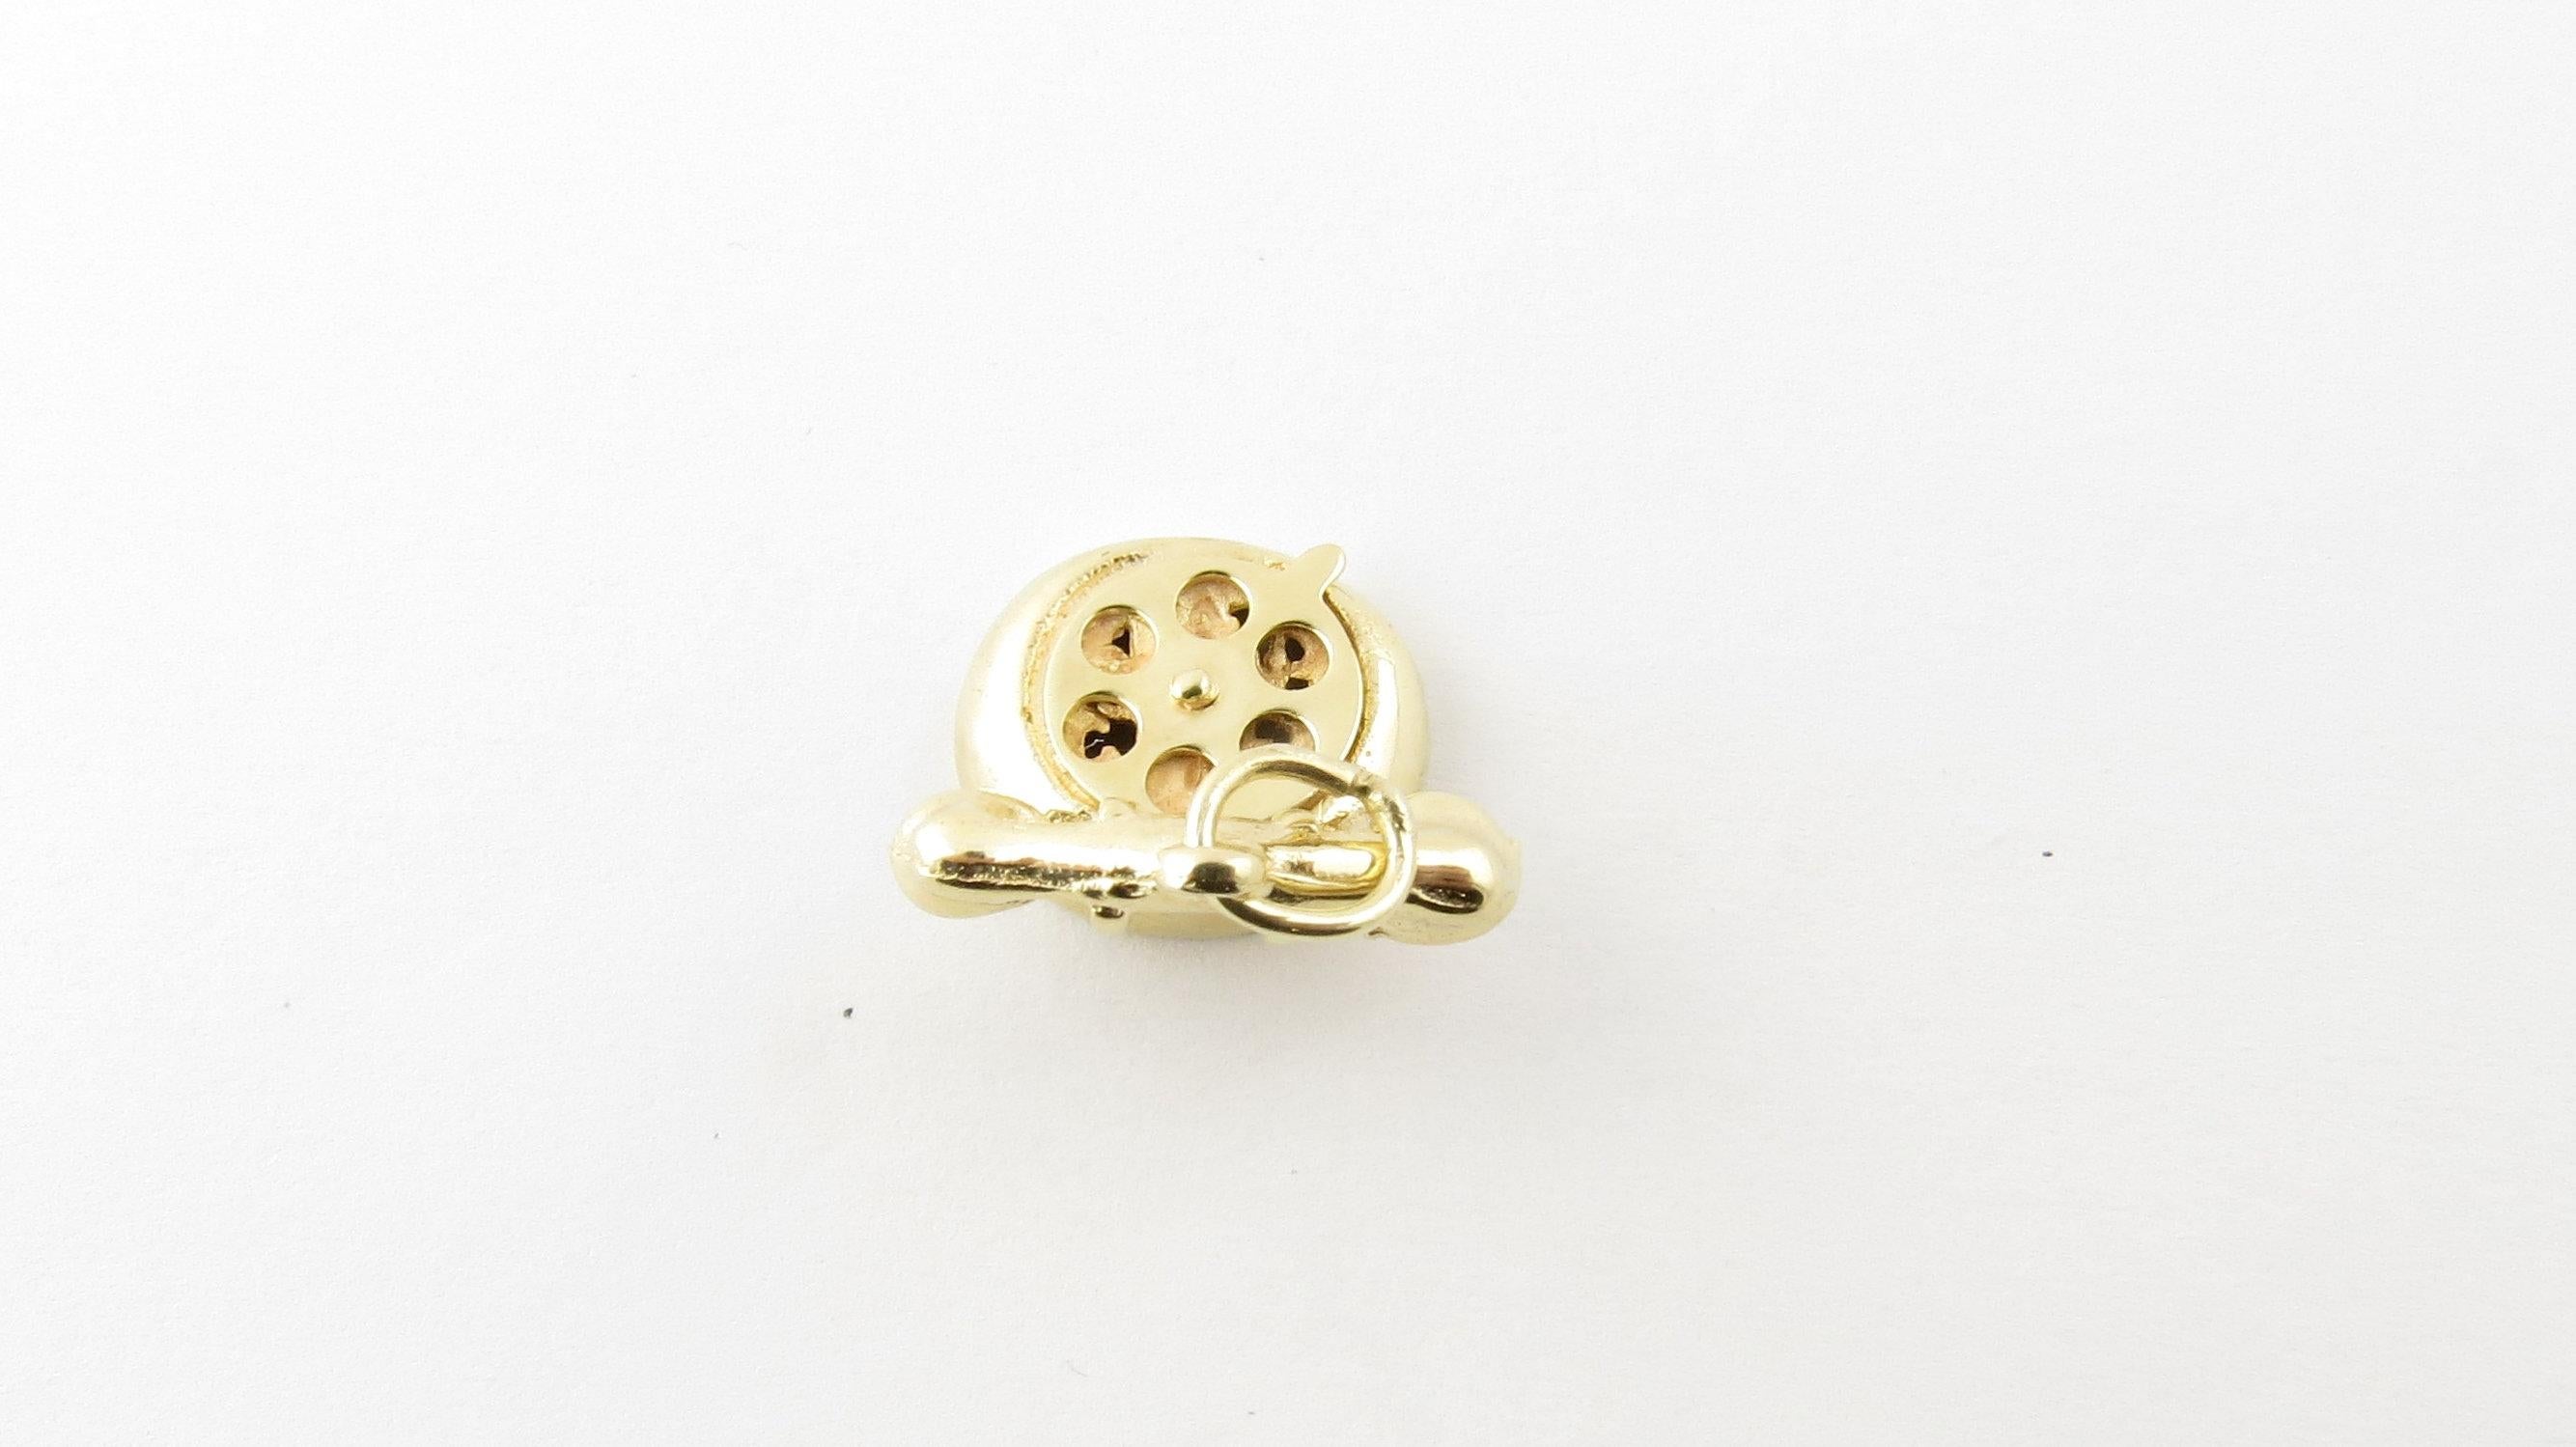 Vintage 14 Karat Yellow Gold Rotary Dial Telephone Charm- Go back to a simpler time! This lovely 3D charm features a miniature telephone with moving rotary dial meticulously detailed in 14K yellow gold. Size: 12 mm x 15 mm (actual charm) Weight: 1.5